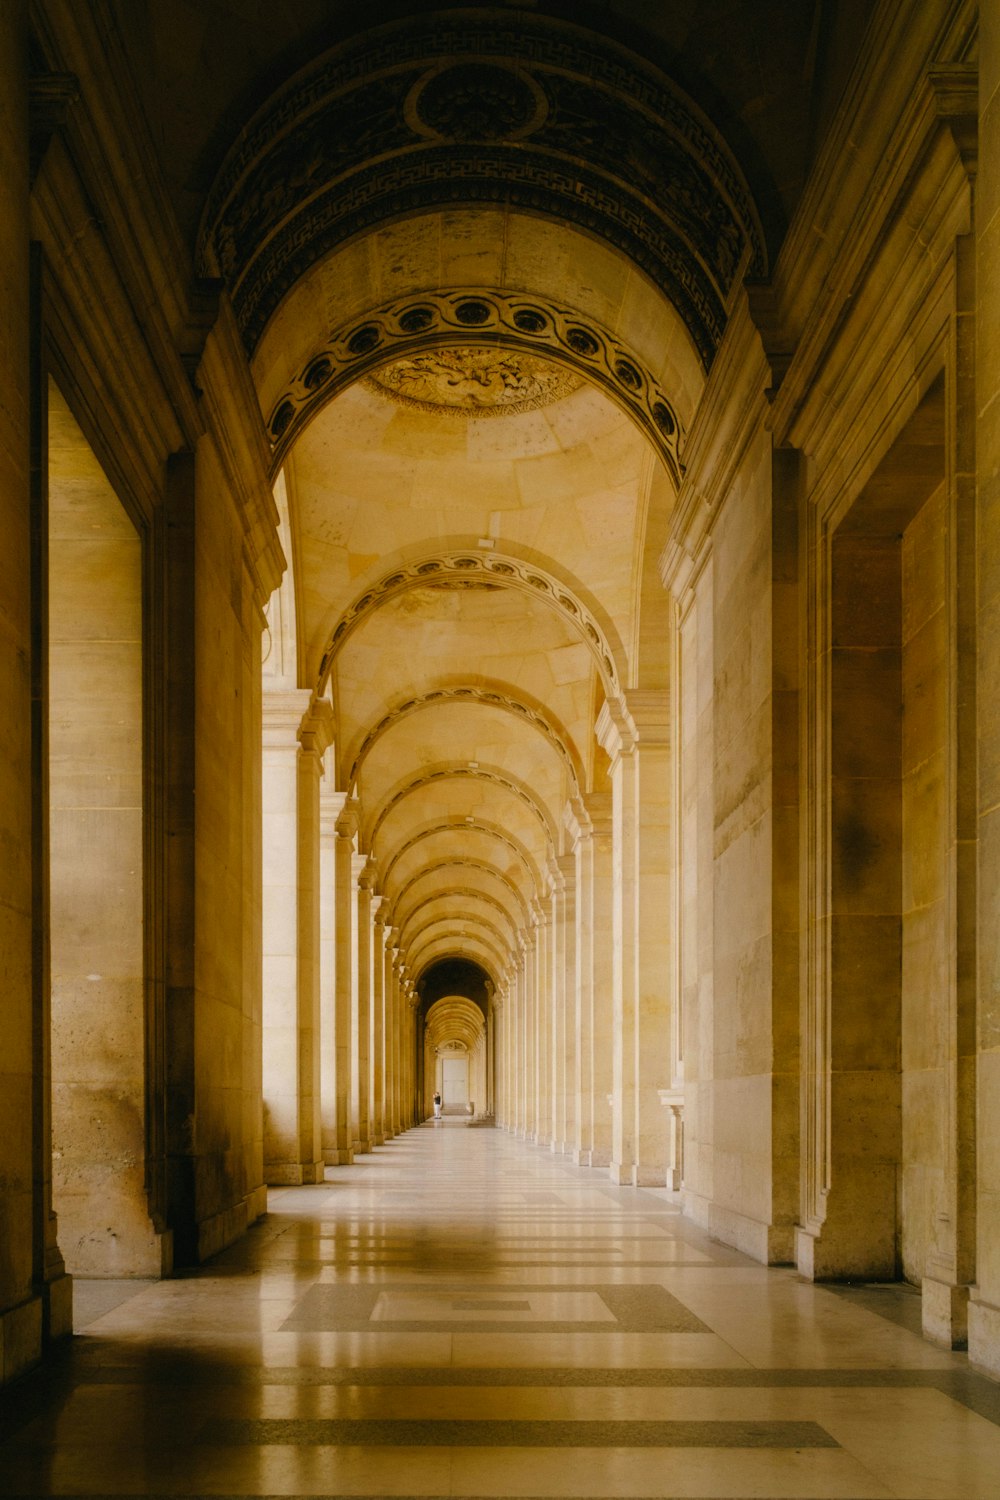 a hallway with arched ceilings